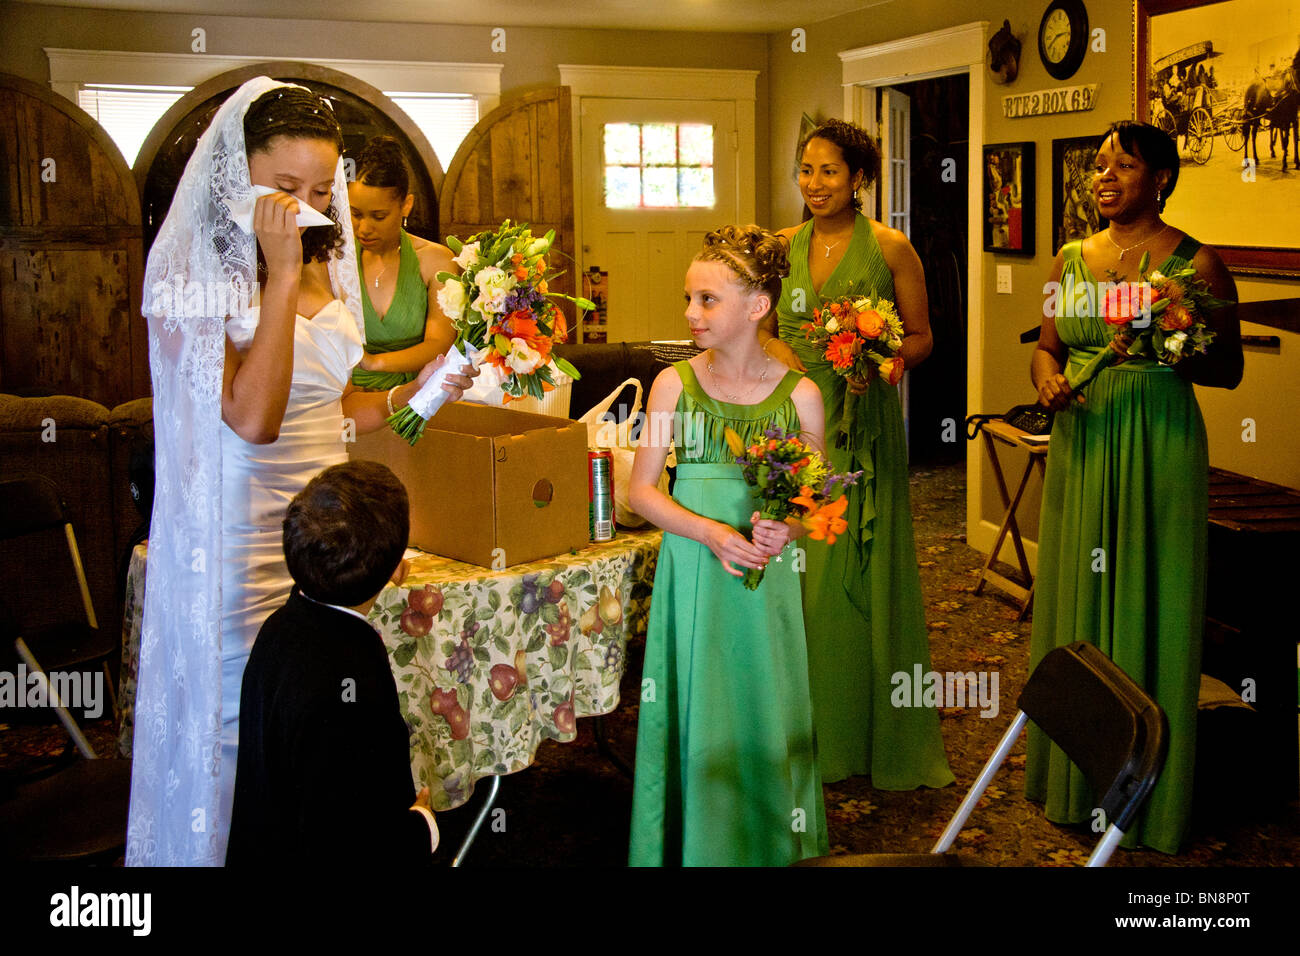 A young mixed-race bride has a weepy moment with her bridesmaids before a formal wedding in Orange, CA. Stock Photo